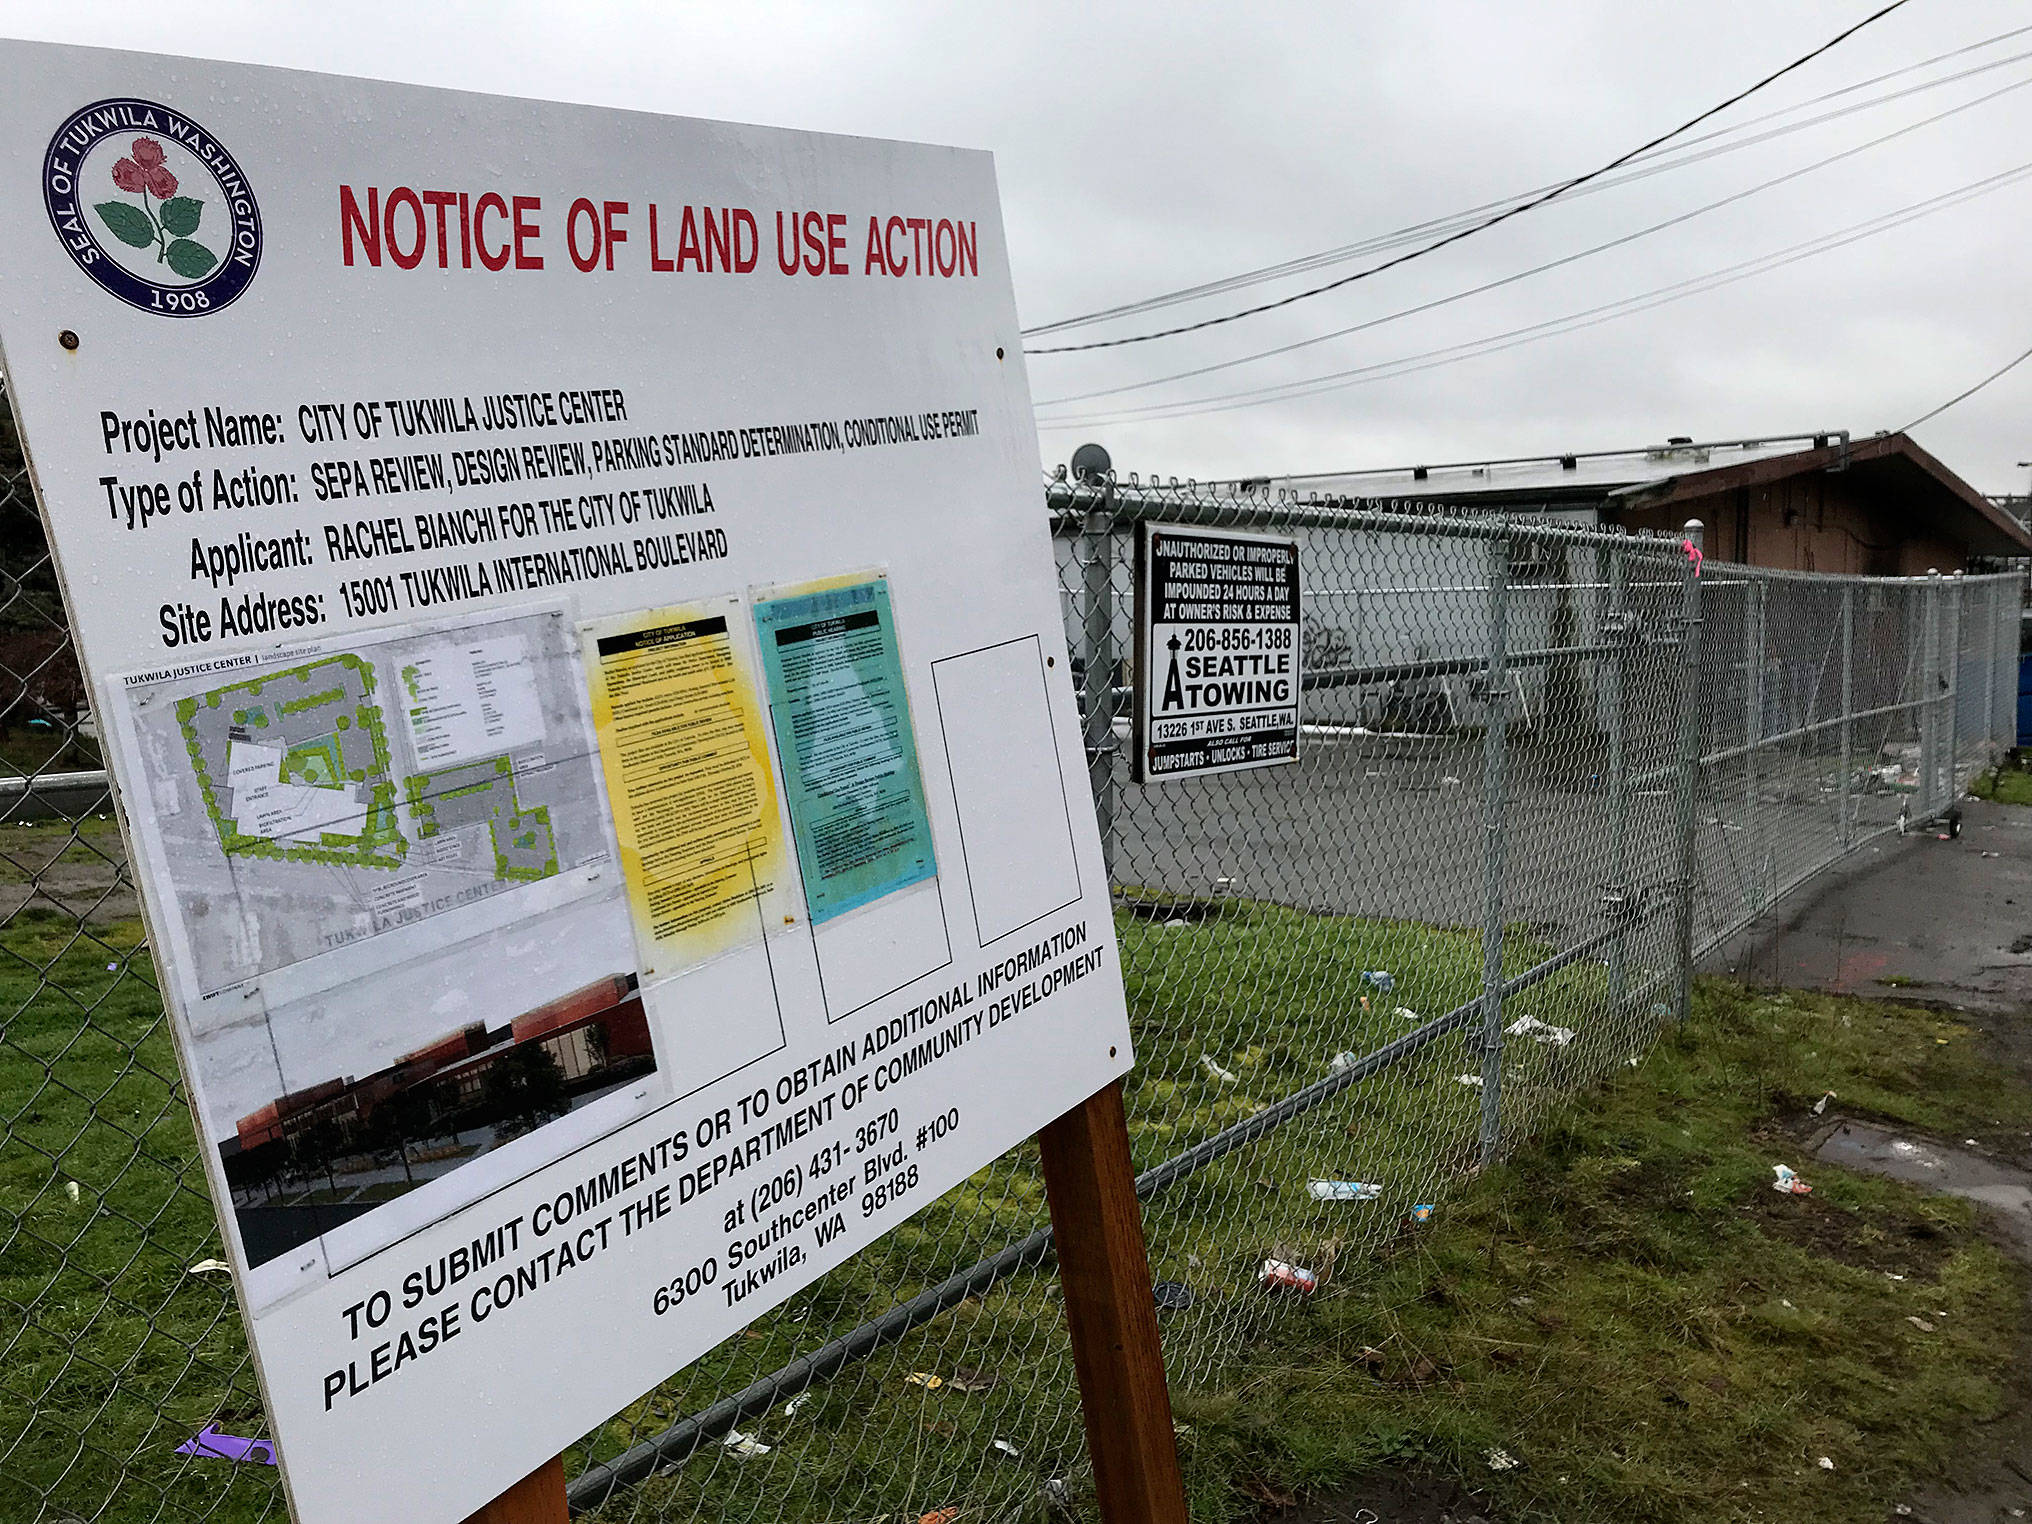 Tukwila is planning on building a new justice center to house the city’s police department and municipal court. To make room for the center, the city came to an agreement with more than a dozen businesses located along South 150th Street. Photo by Andy Hobbs